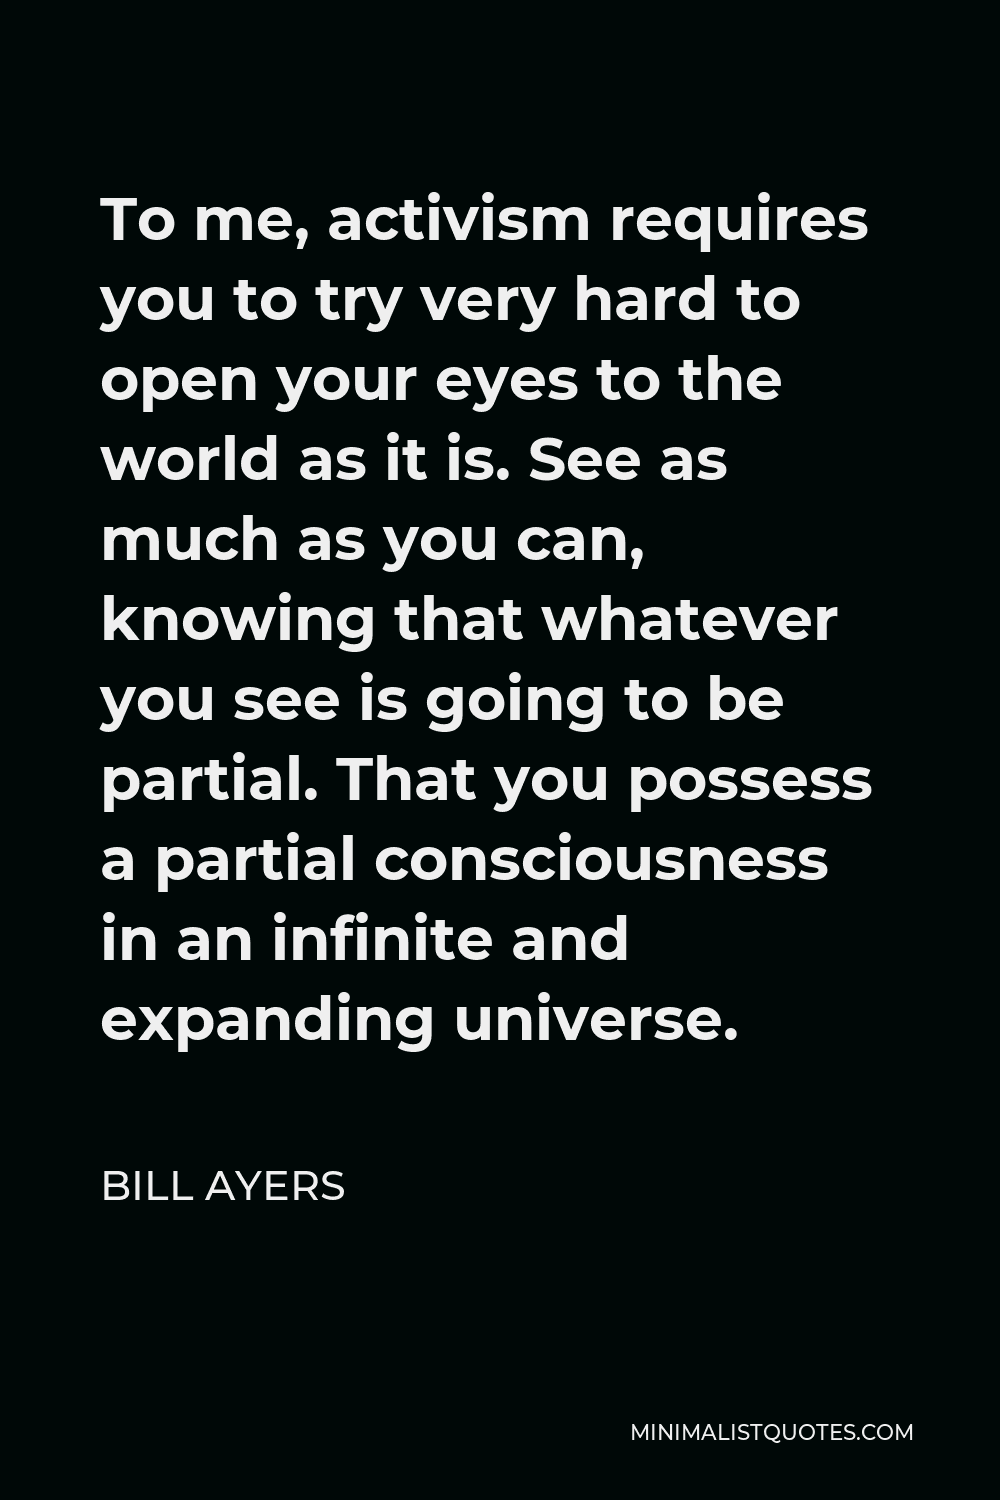 Bill Ayers Quote - To me, activism requires you to try very hard to open your eyes to the world as it is. See as much as you can, knowing that whatever you see is going to be partial. That you possess a partial consciousness in an infinite and expanding universe.